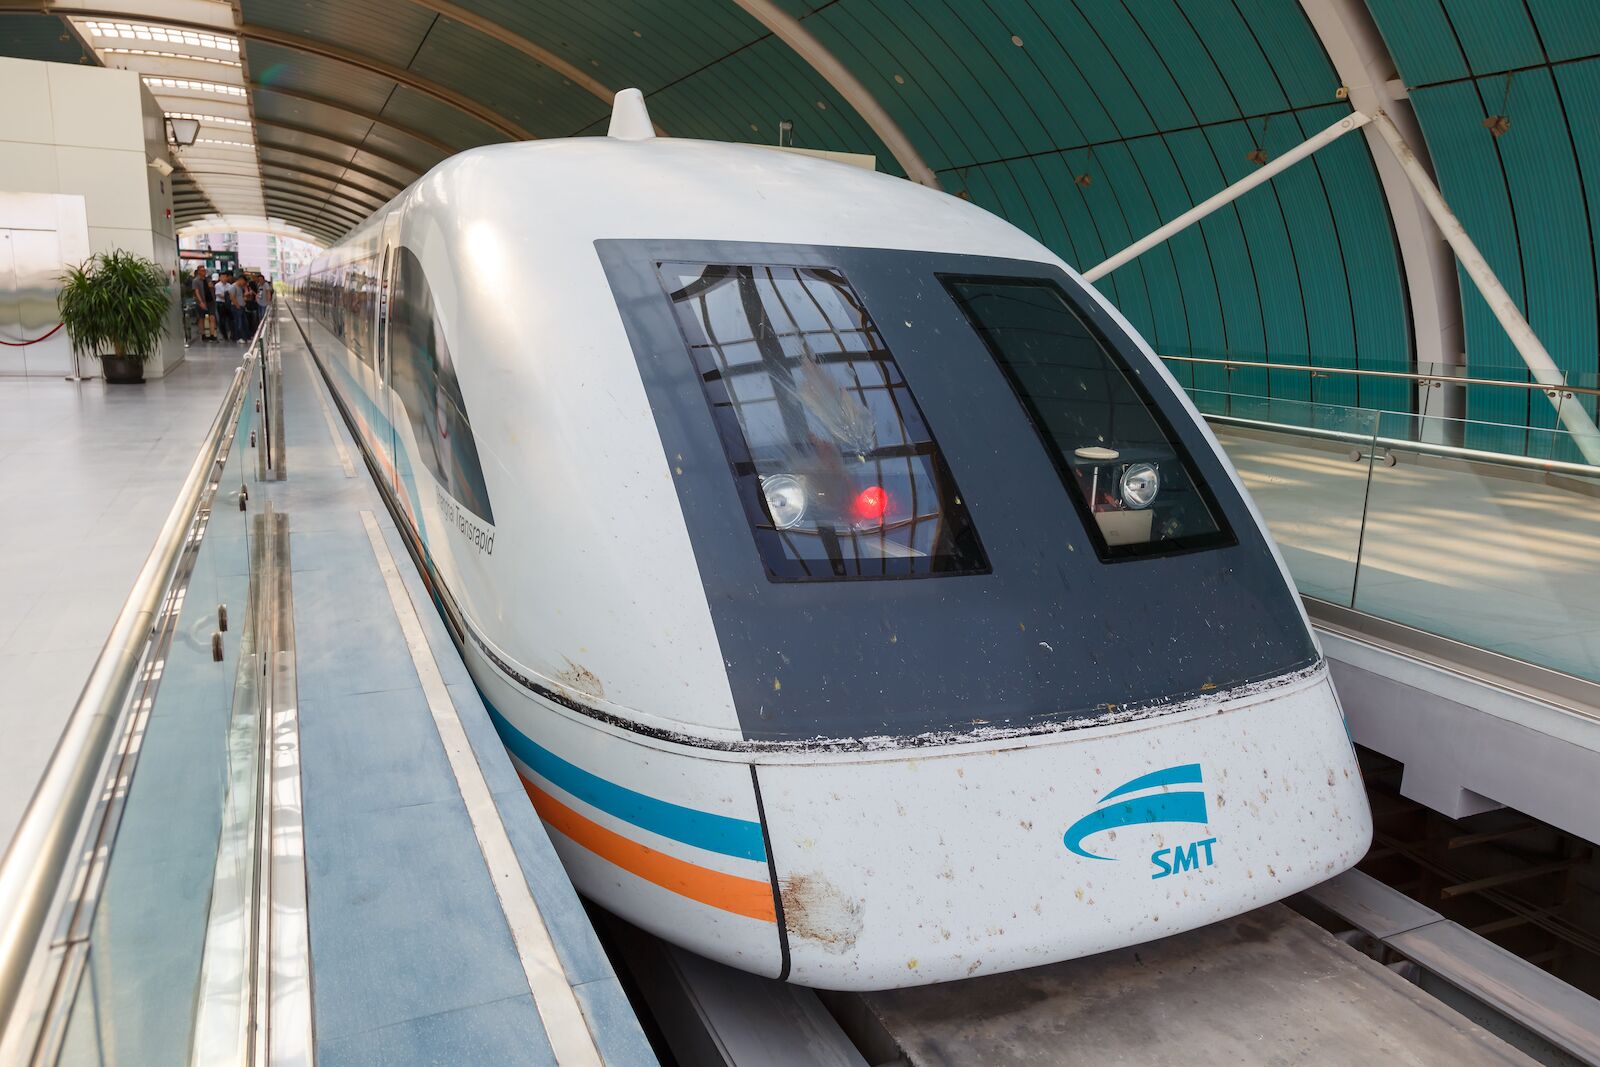 SMT or Shanghai Maglev Train waiting in the train station